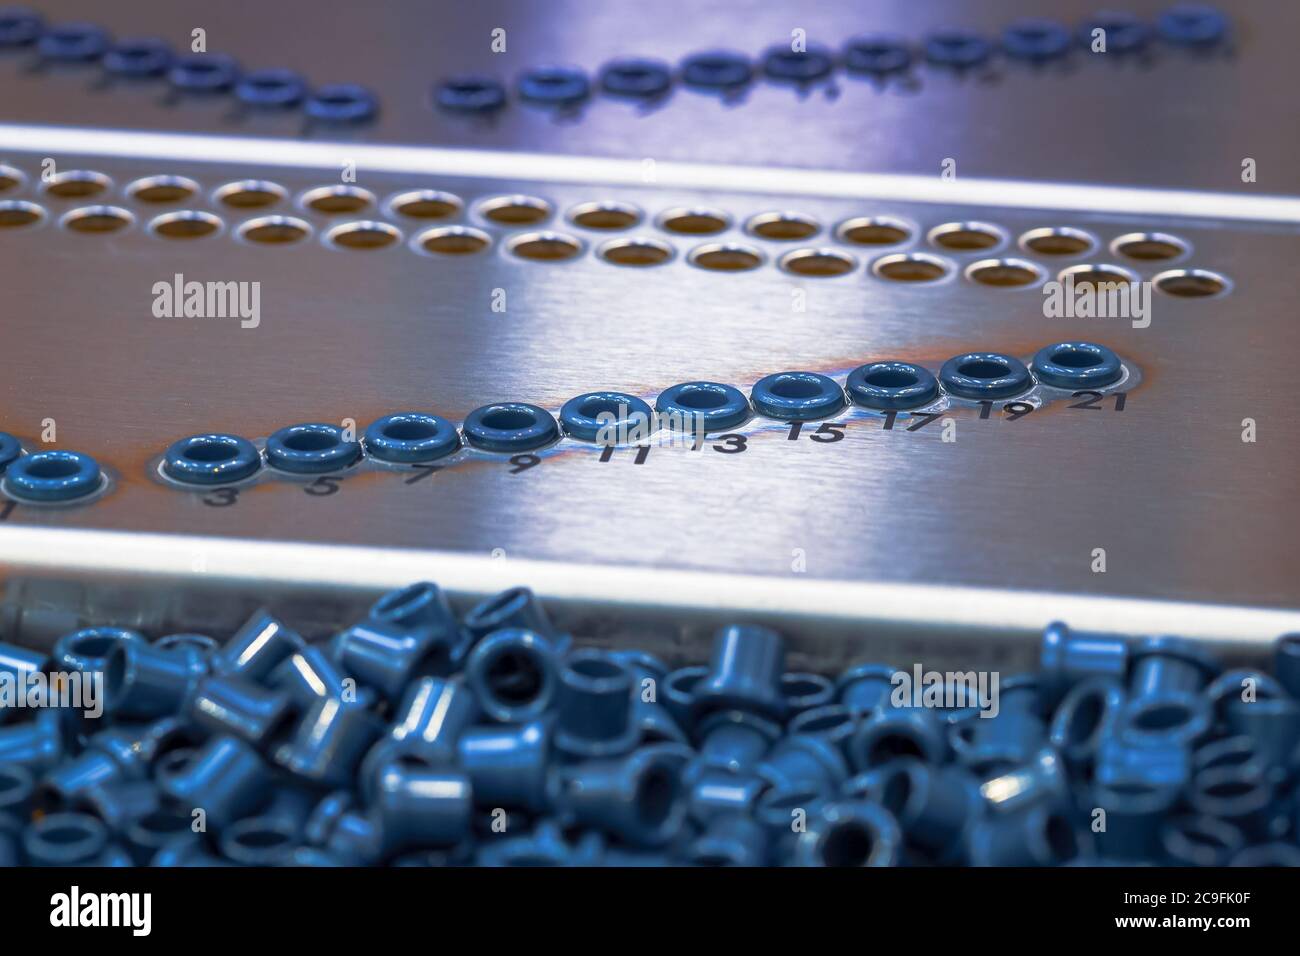 Ceramic Eyelets bonded to stainless steel panel Stock Photo